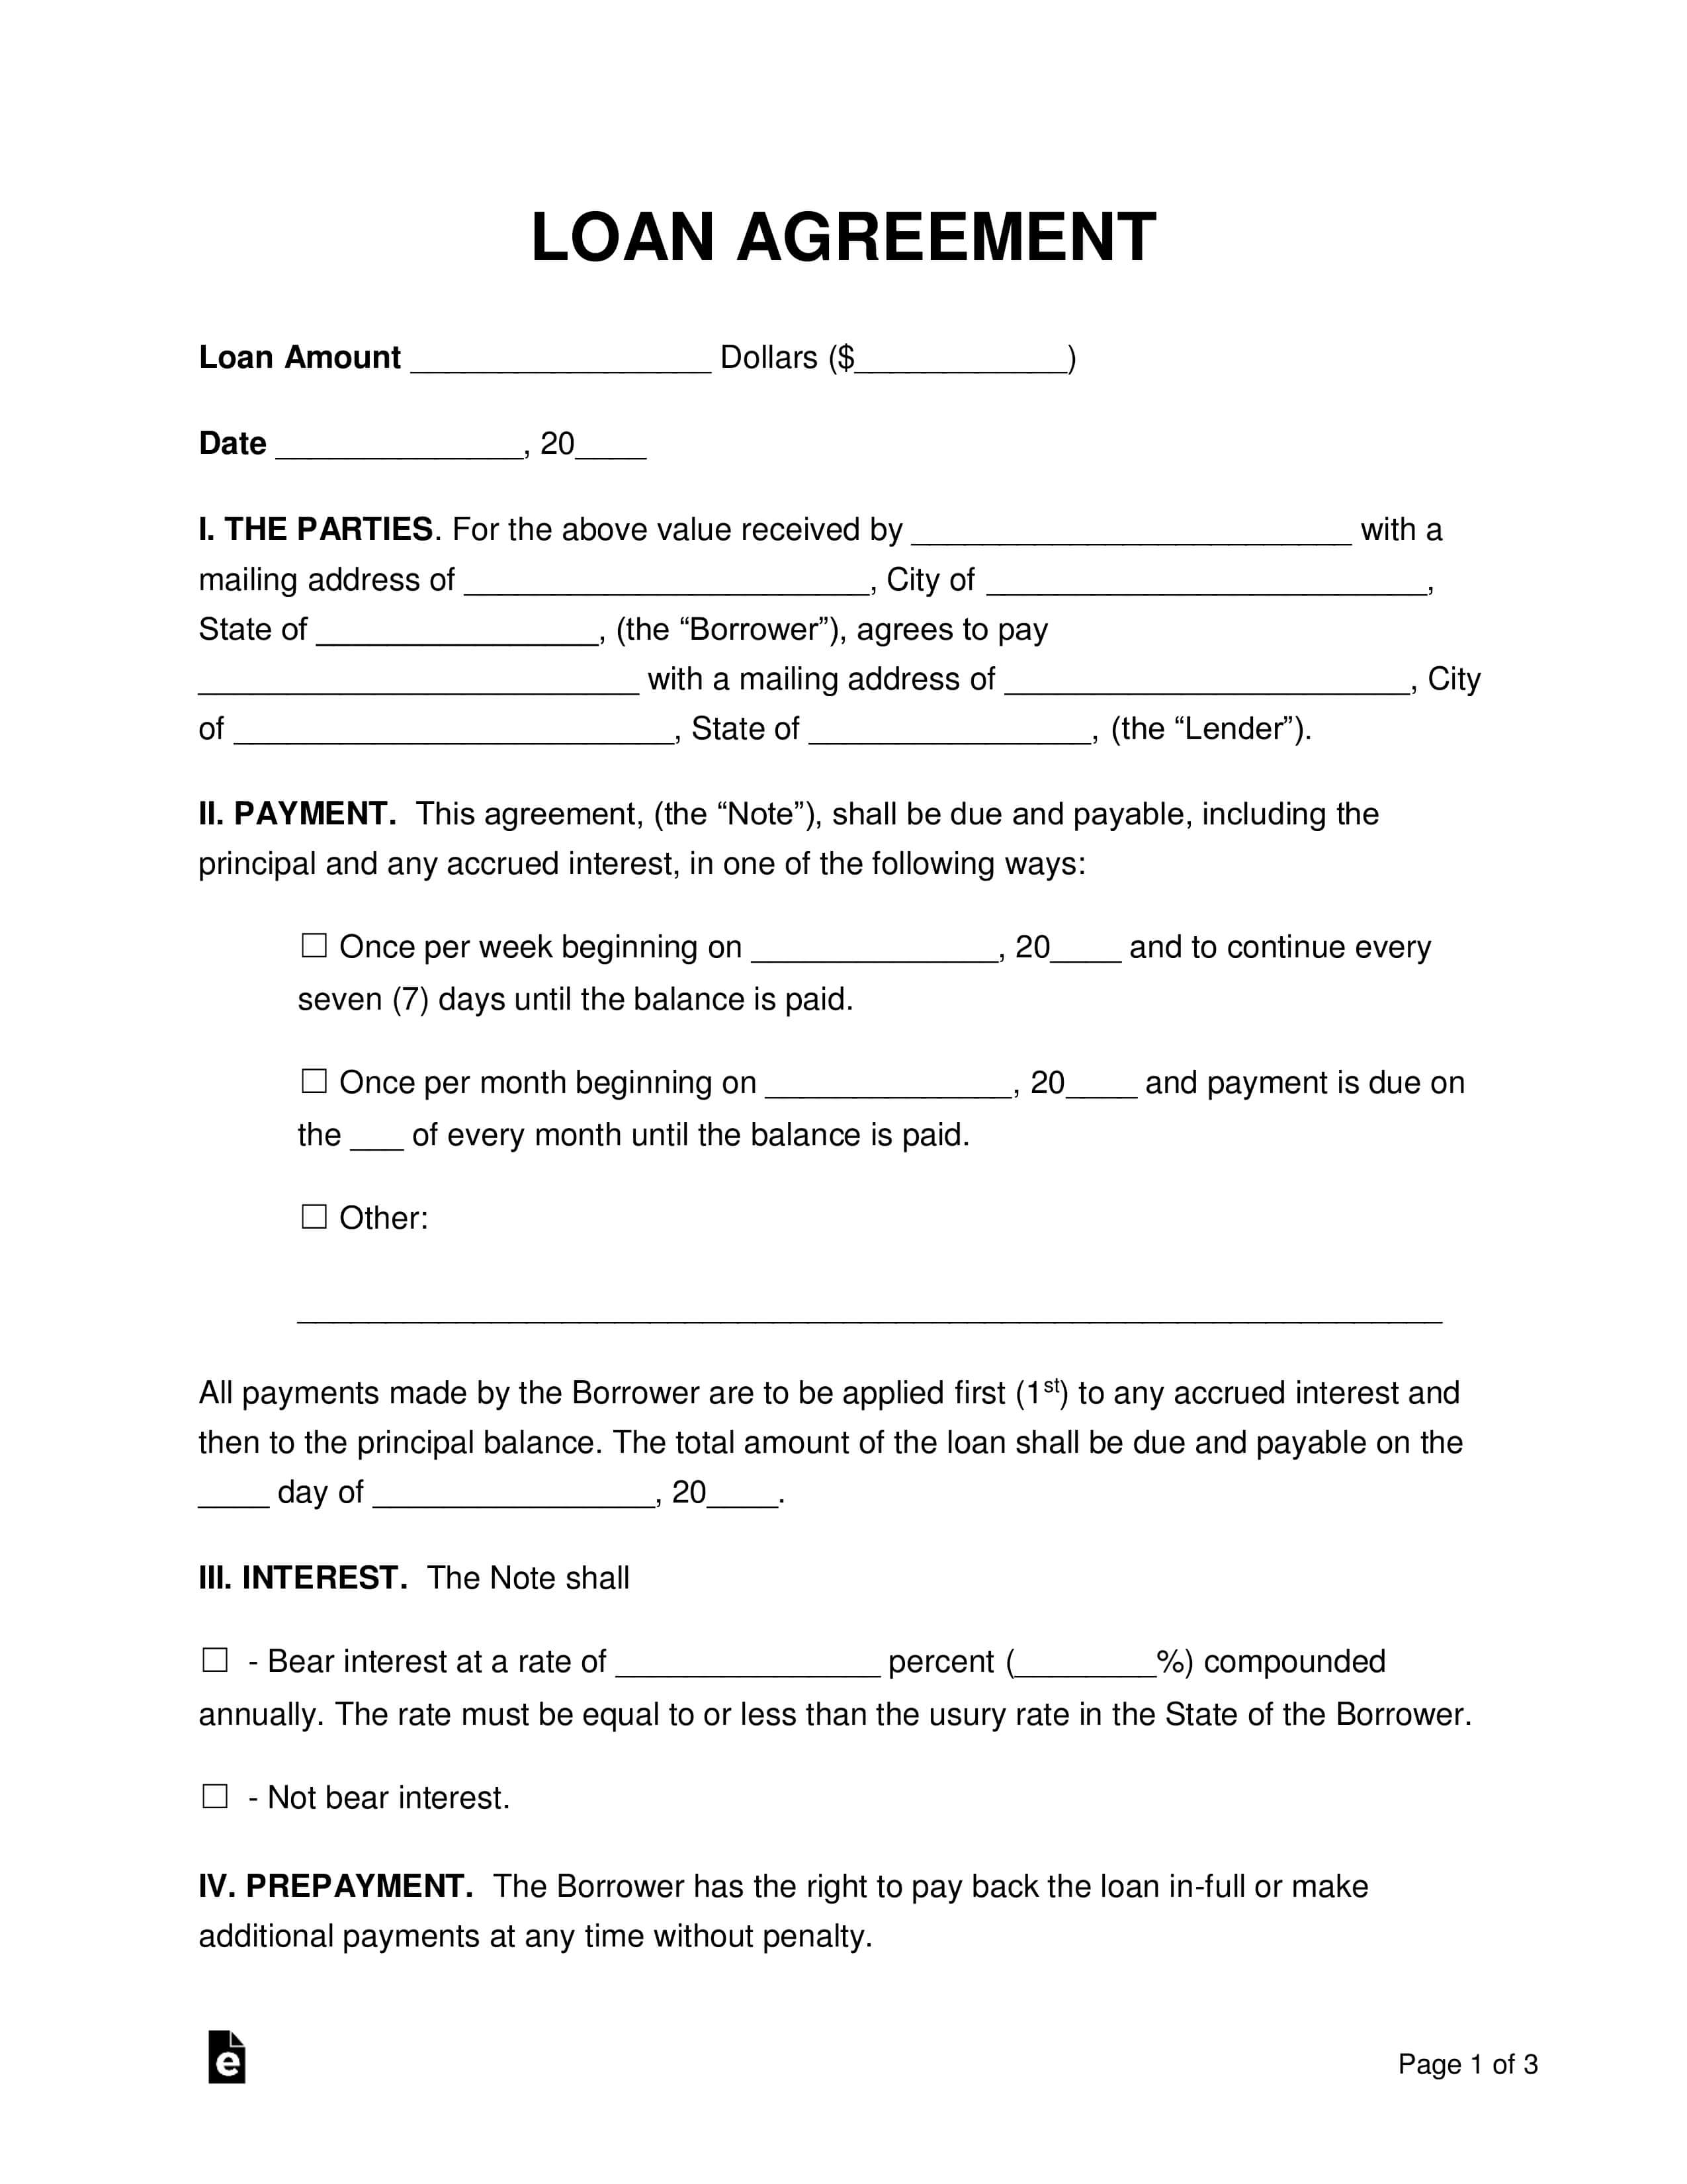 Free Loan Agreement Templates - Pdf | Word | Eforms – Free With Blank Loan Agreement Template